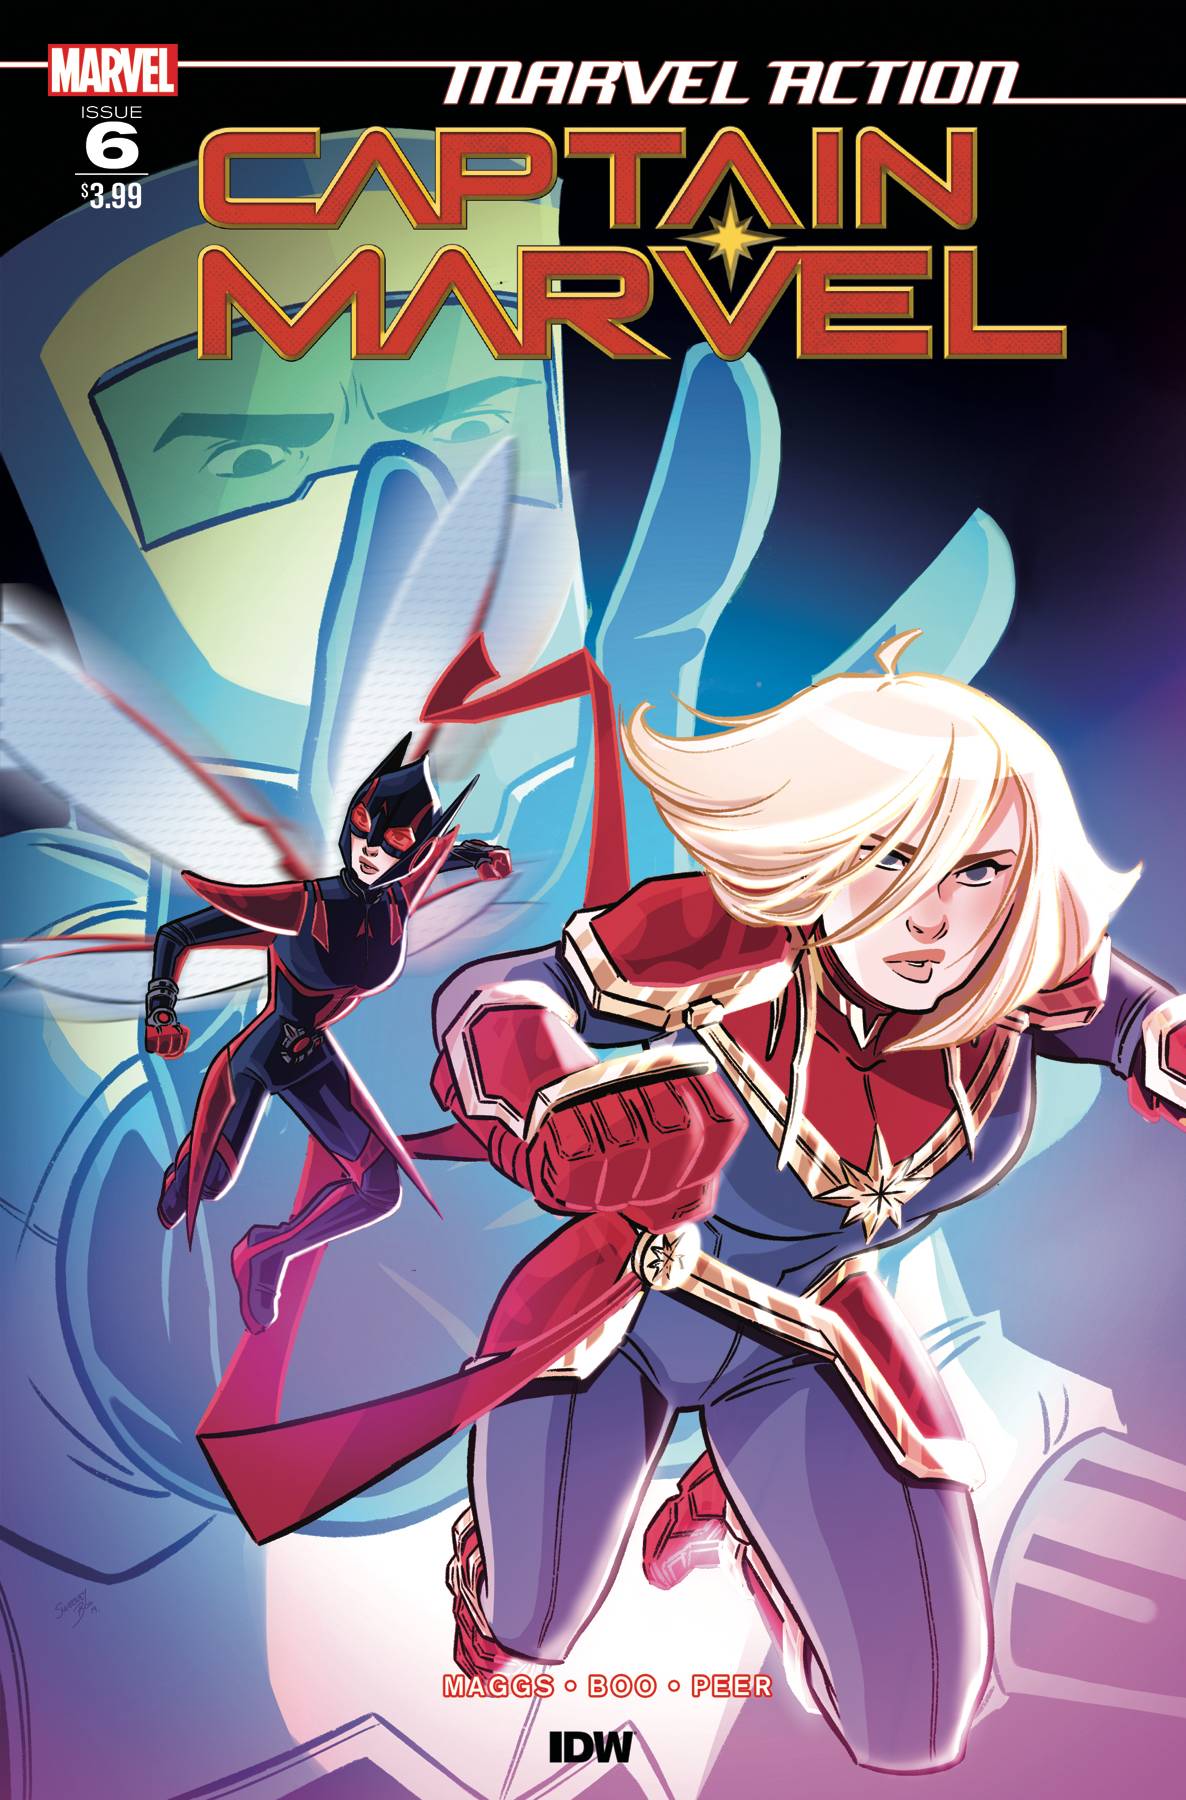 Marvel Action Captain Marvel #6 Cover A Boo